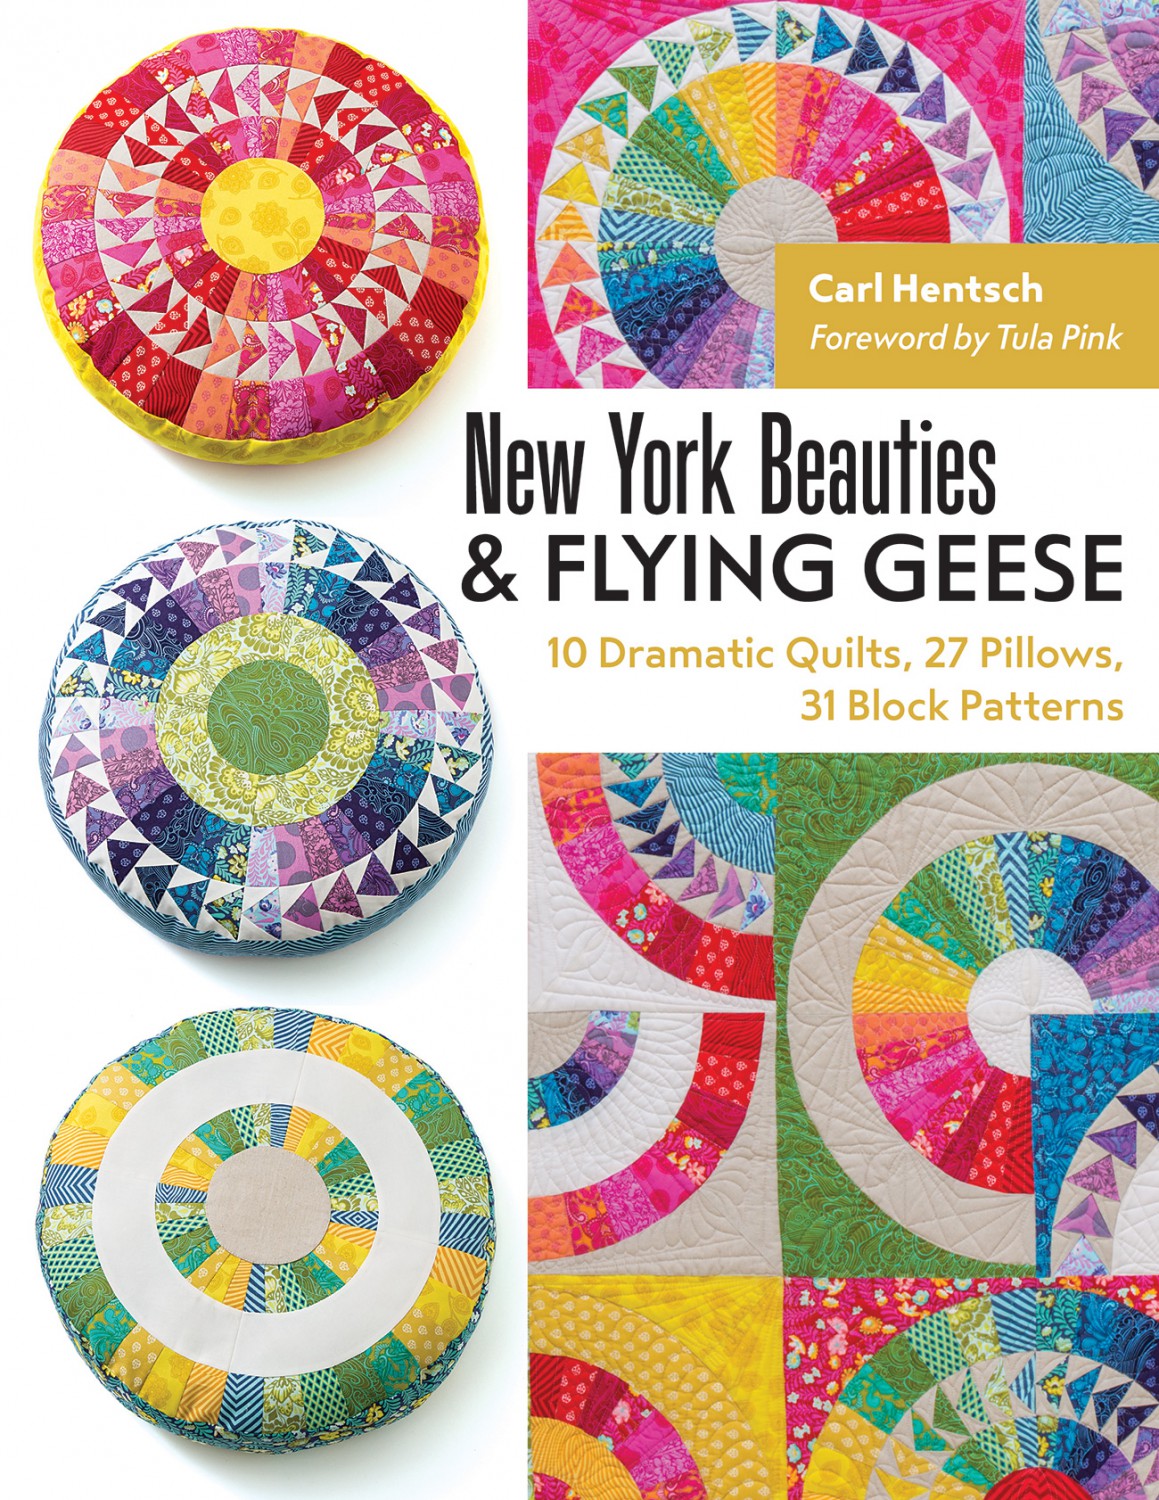 New York Beauties & Flying Geese Quilt Pattern Book by Carl Hentsch for C&T Publishing